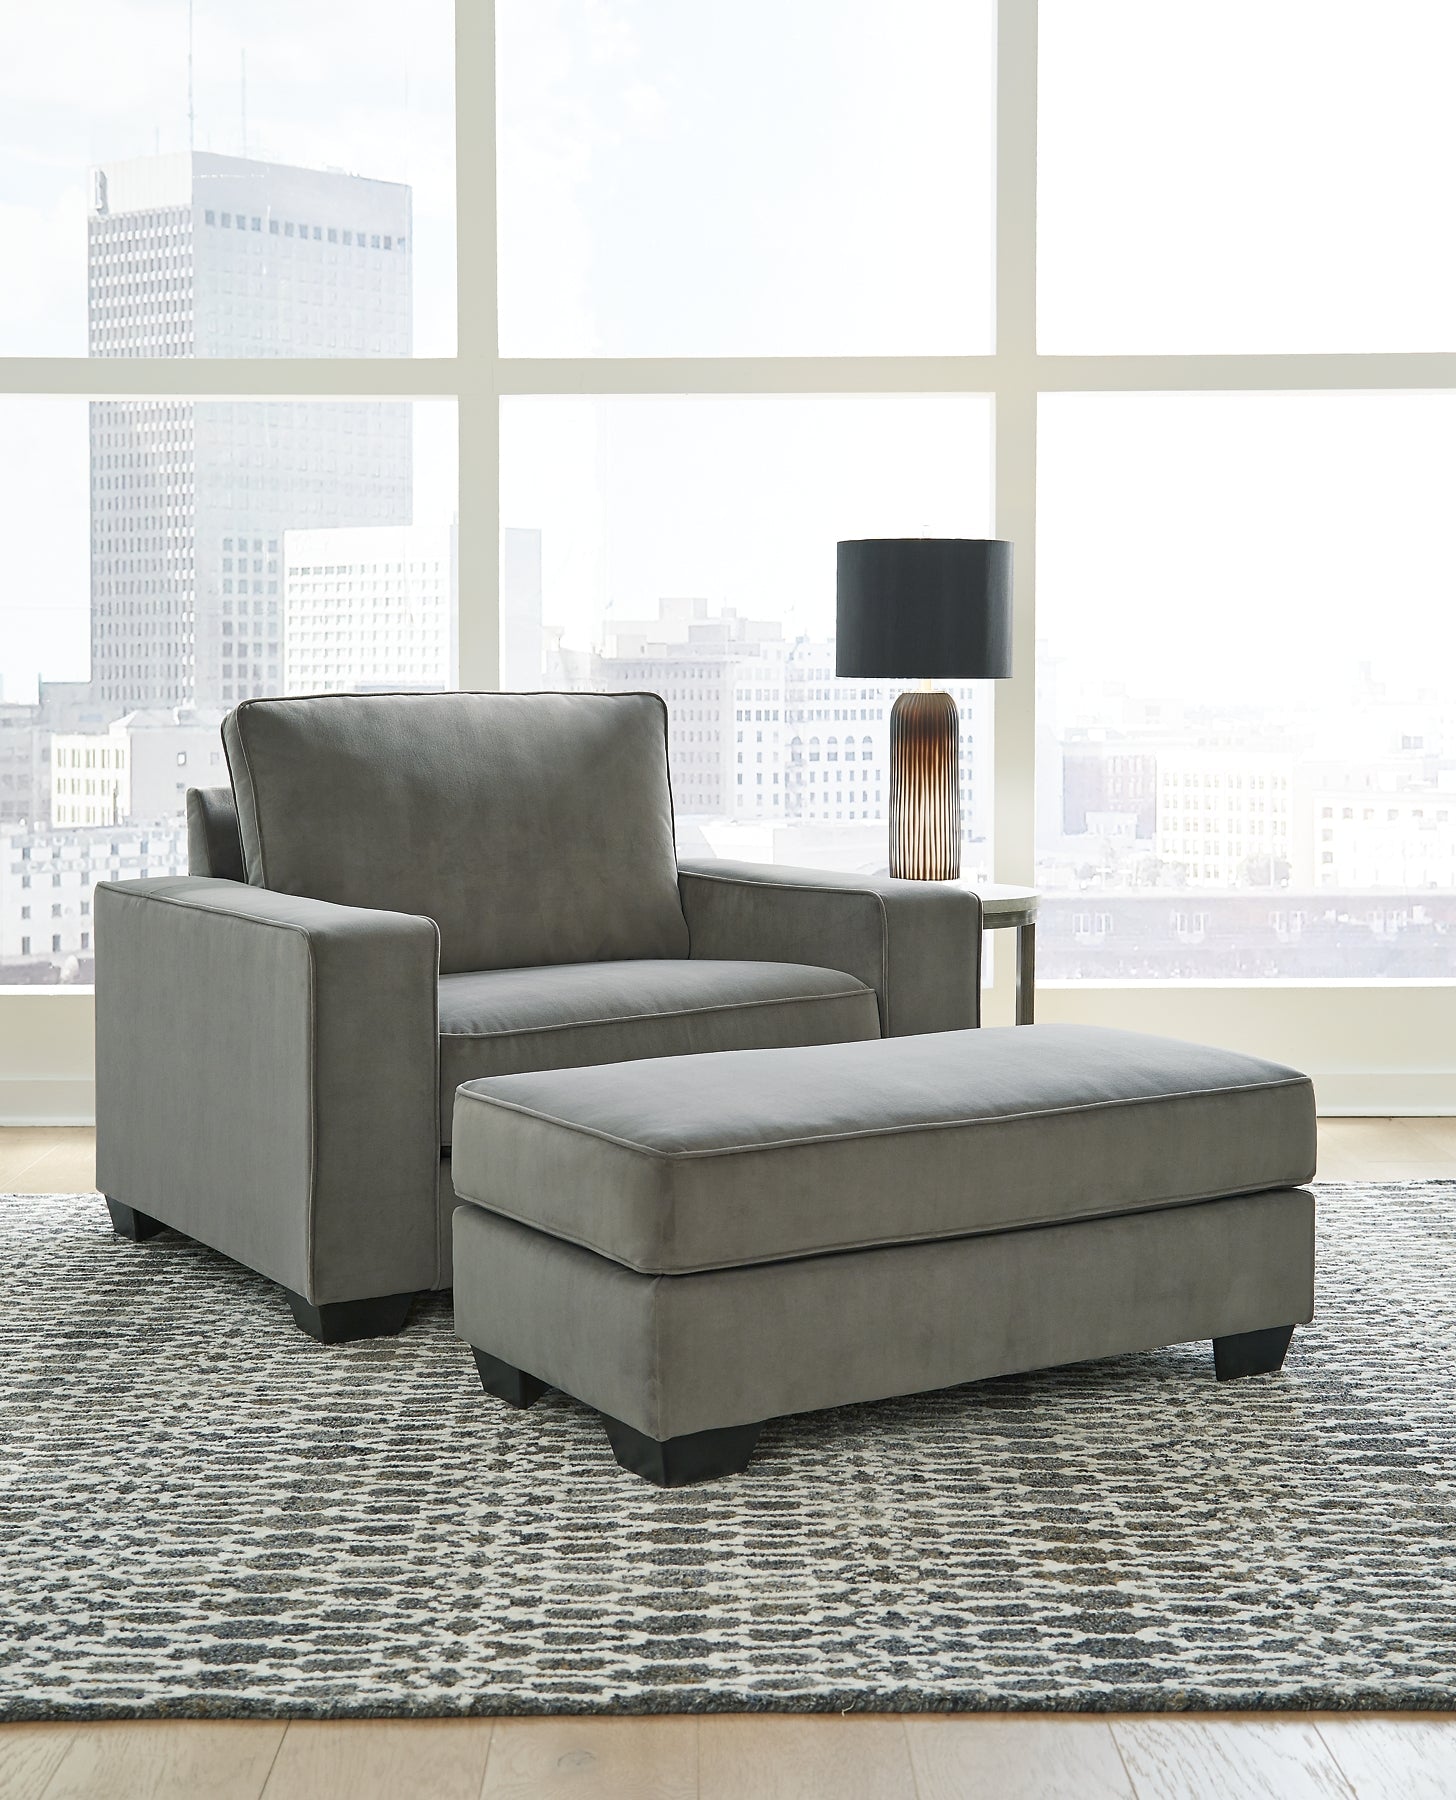 Angleton Chair and Ottoman Rent Wise Rent To Own Jacksonville, Florida